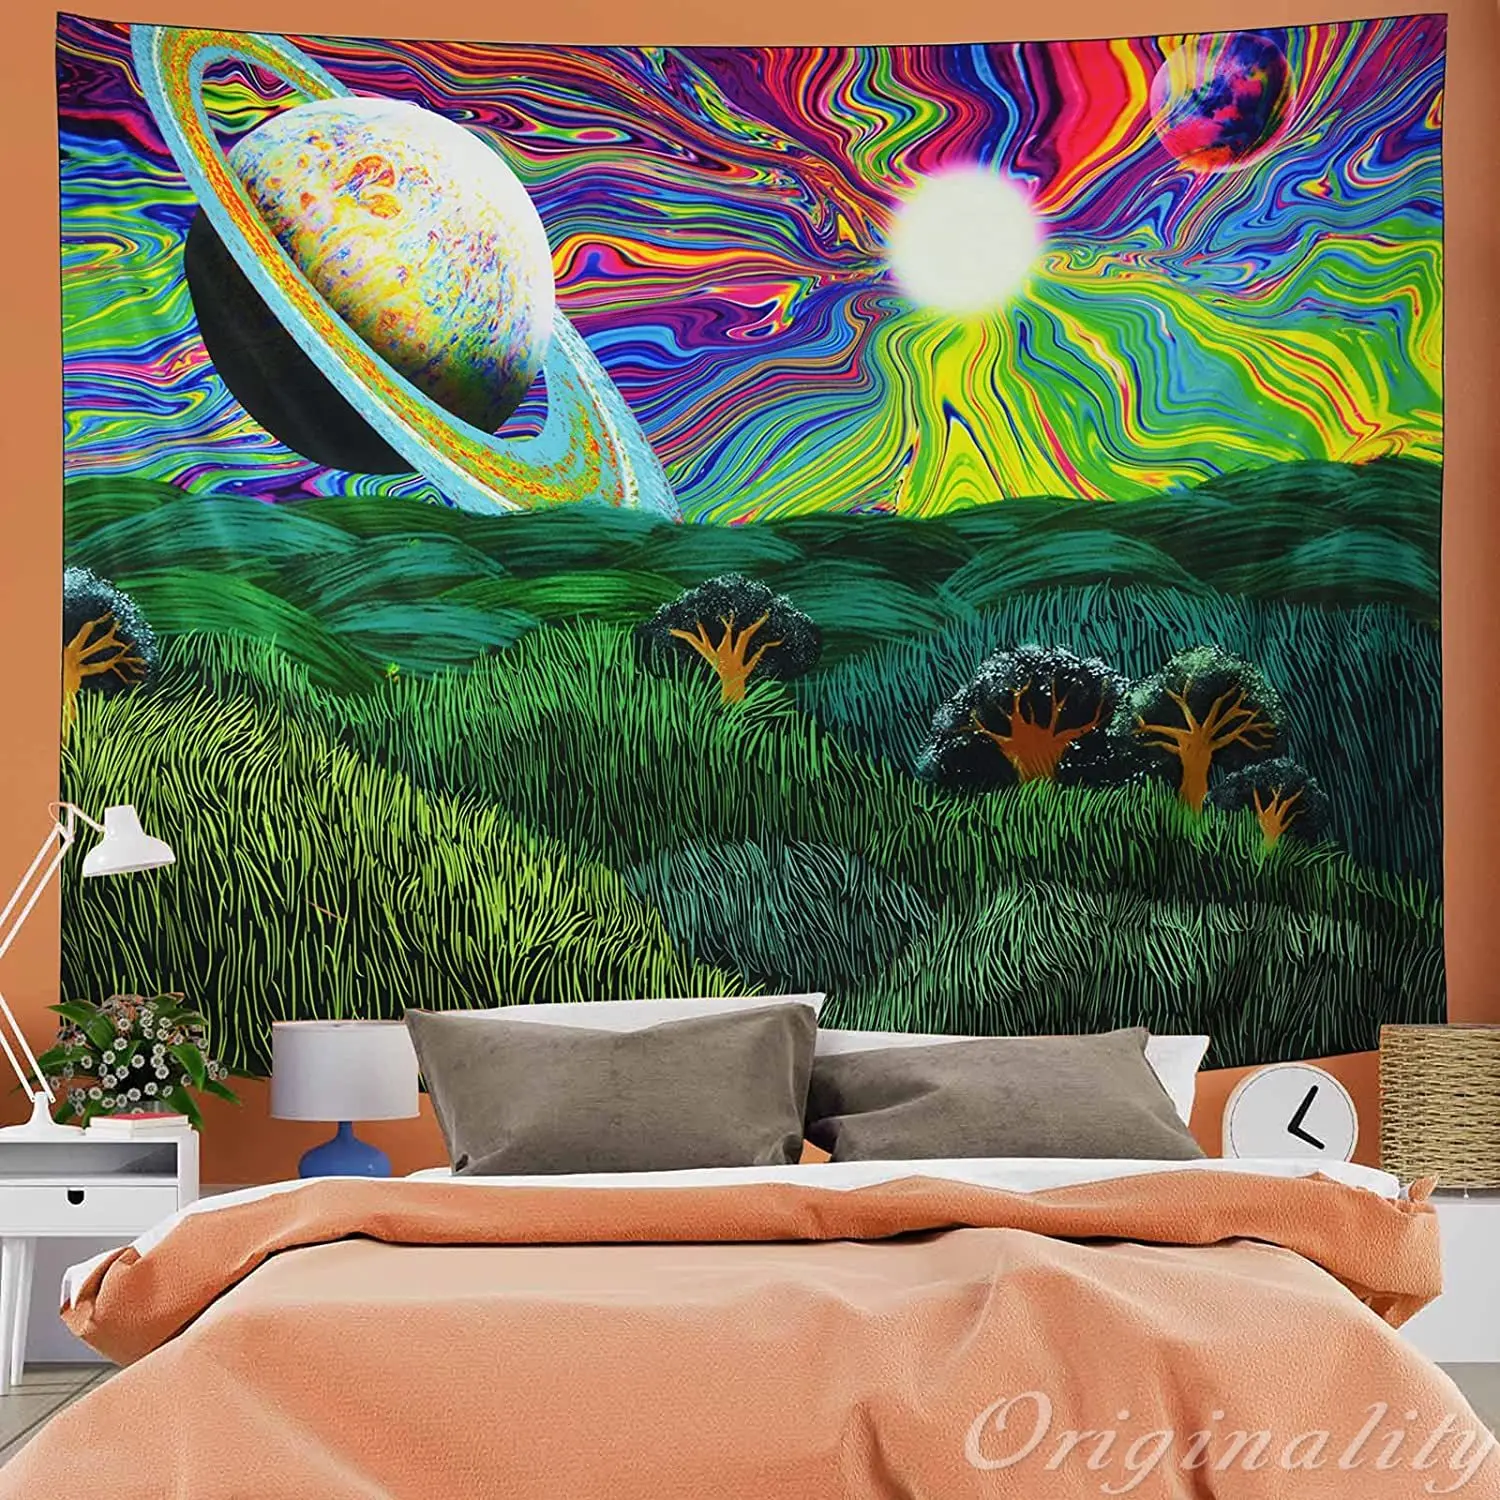 

Trippy Planet Colorful Fantasy Sky Tapestry Psychedelic Sun And Trees Abstract Jungle Landscape Wall Hanging Home Decor